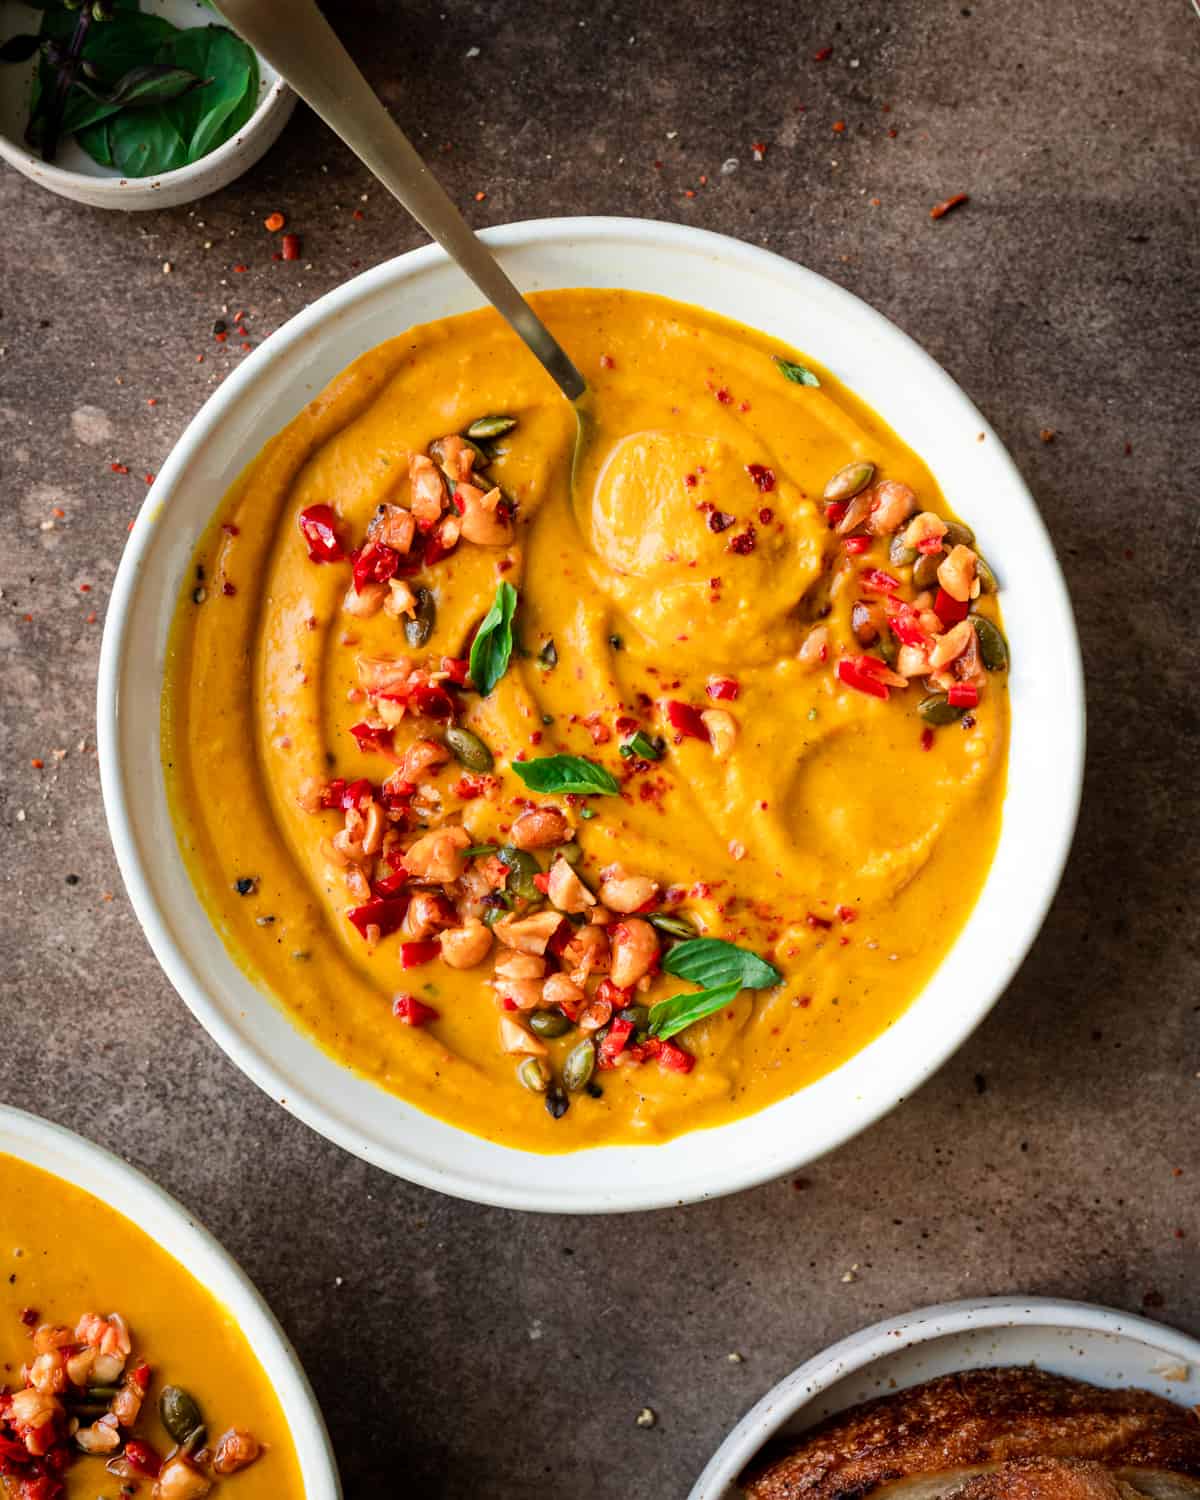 a bowl of thai pumpkin soup with a spoon showing its creamy texture, garnished with thai basil and chili peppers.